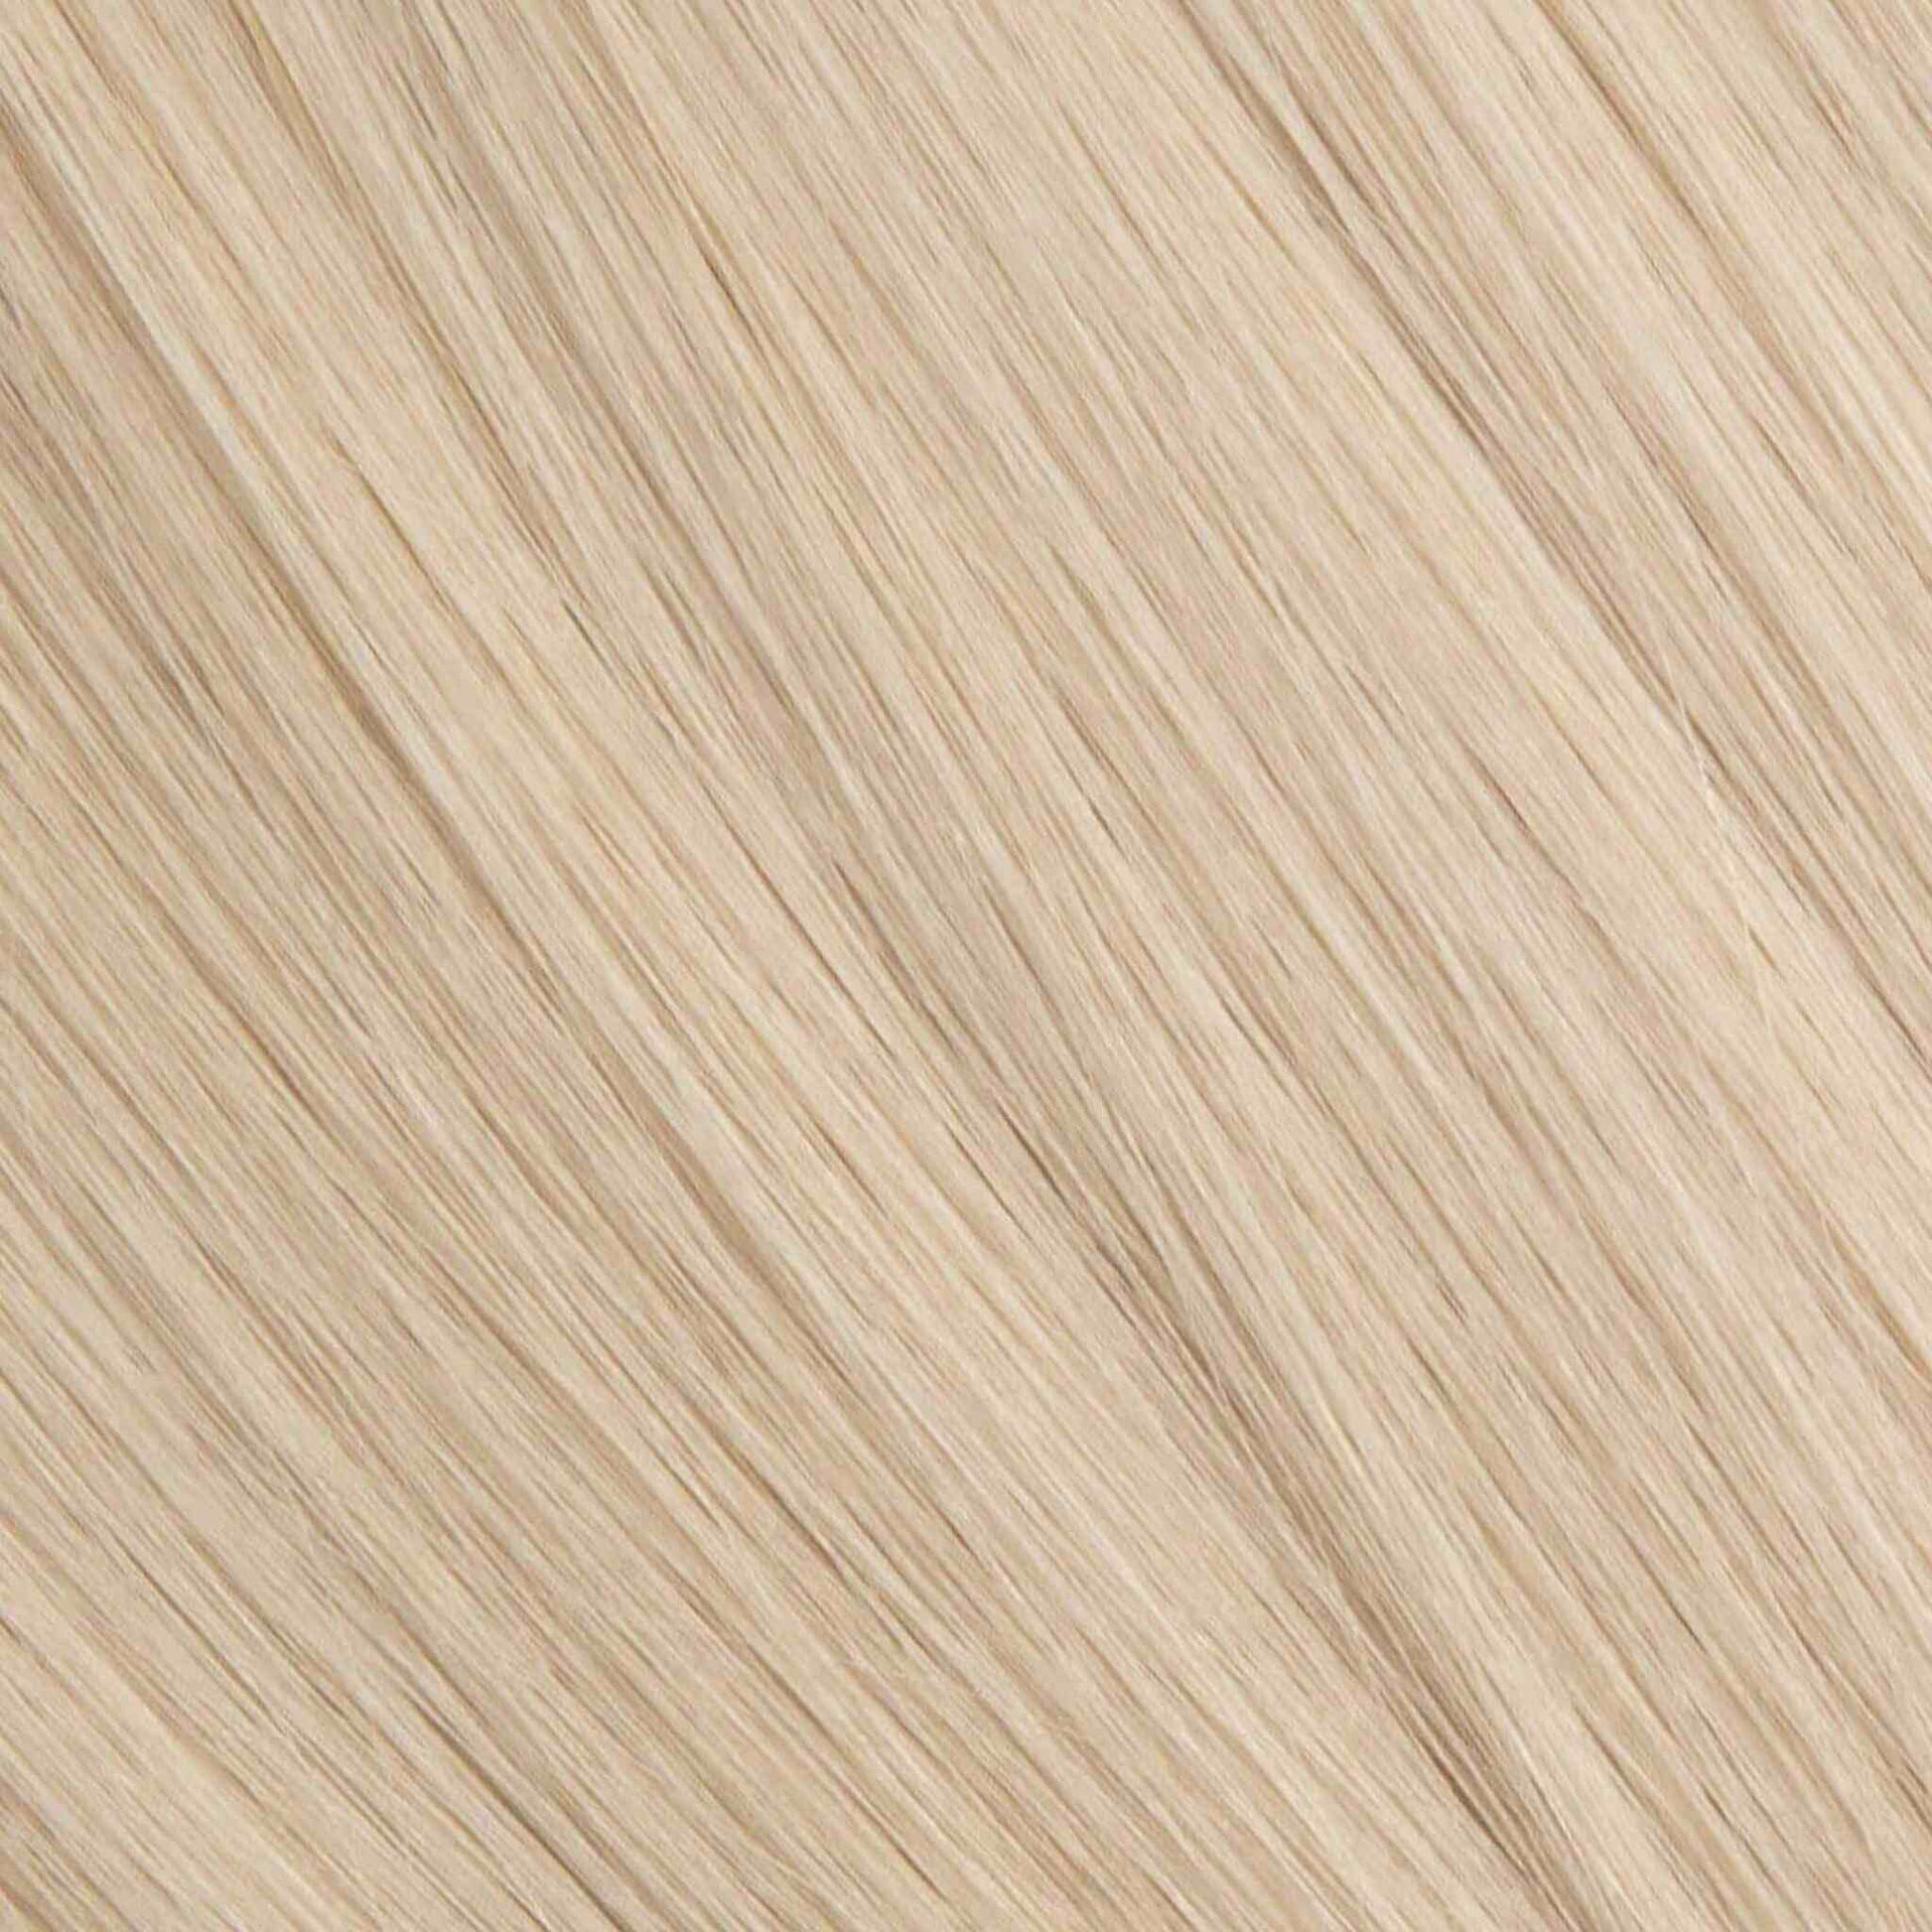 K-Tip 22" 25g Professional Hair Extensions - Icy Silver Blonde #66